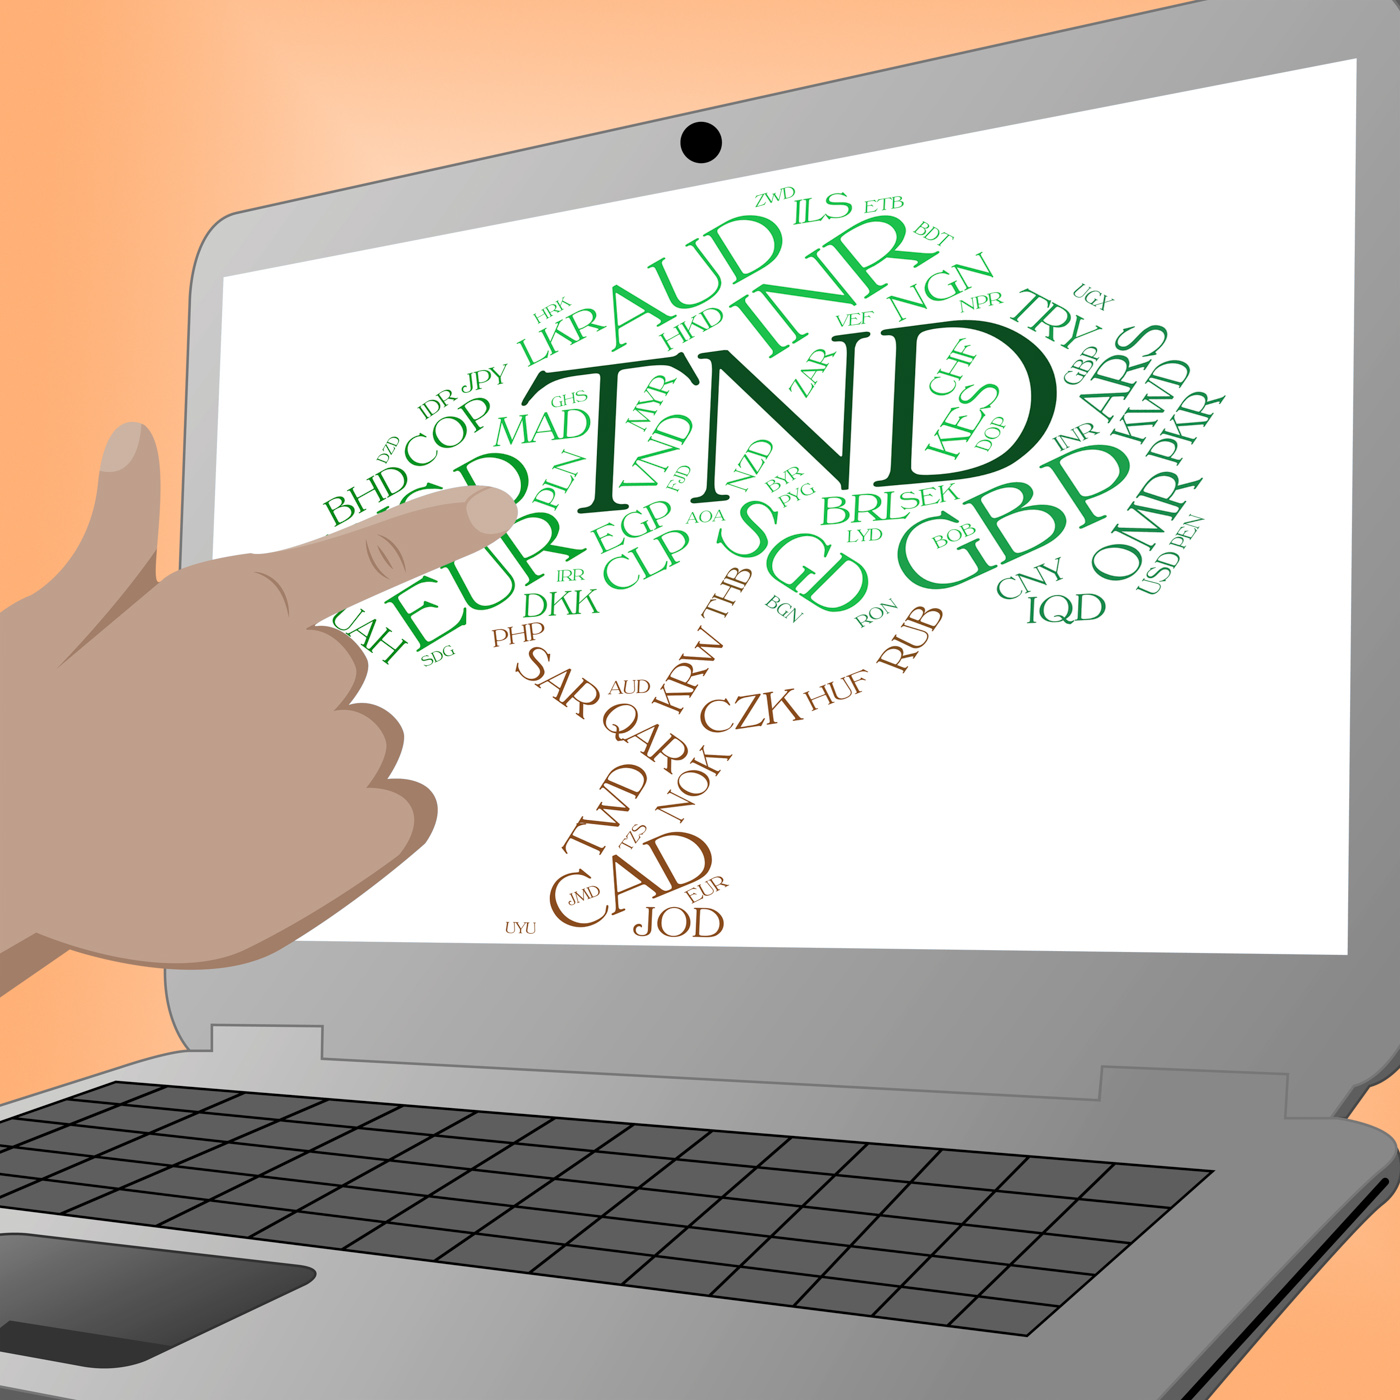 Tnd currency shows worldwide trading and broker photo